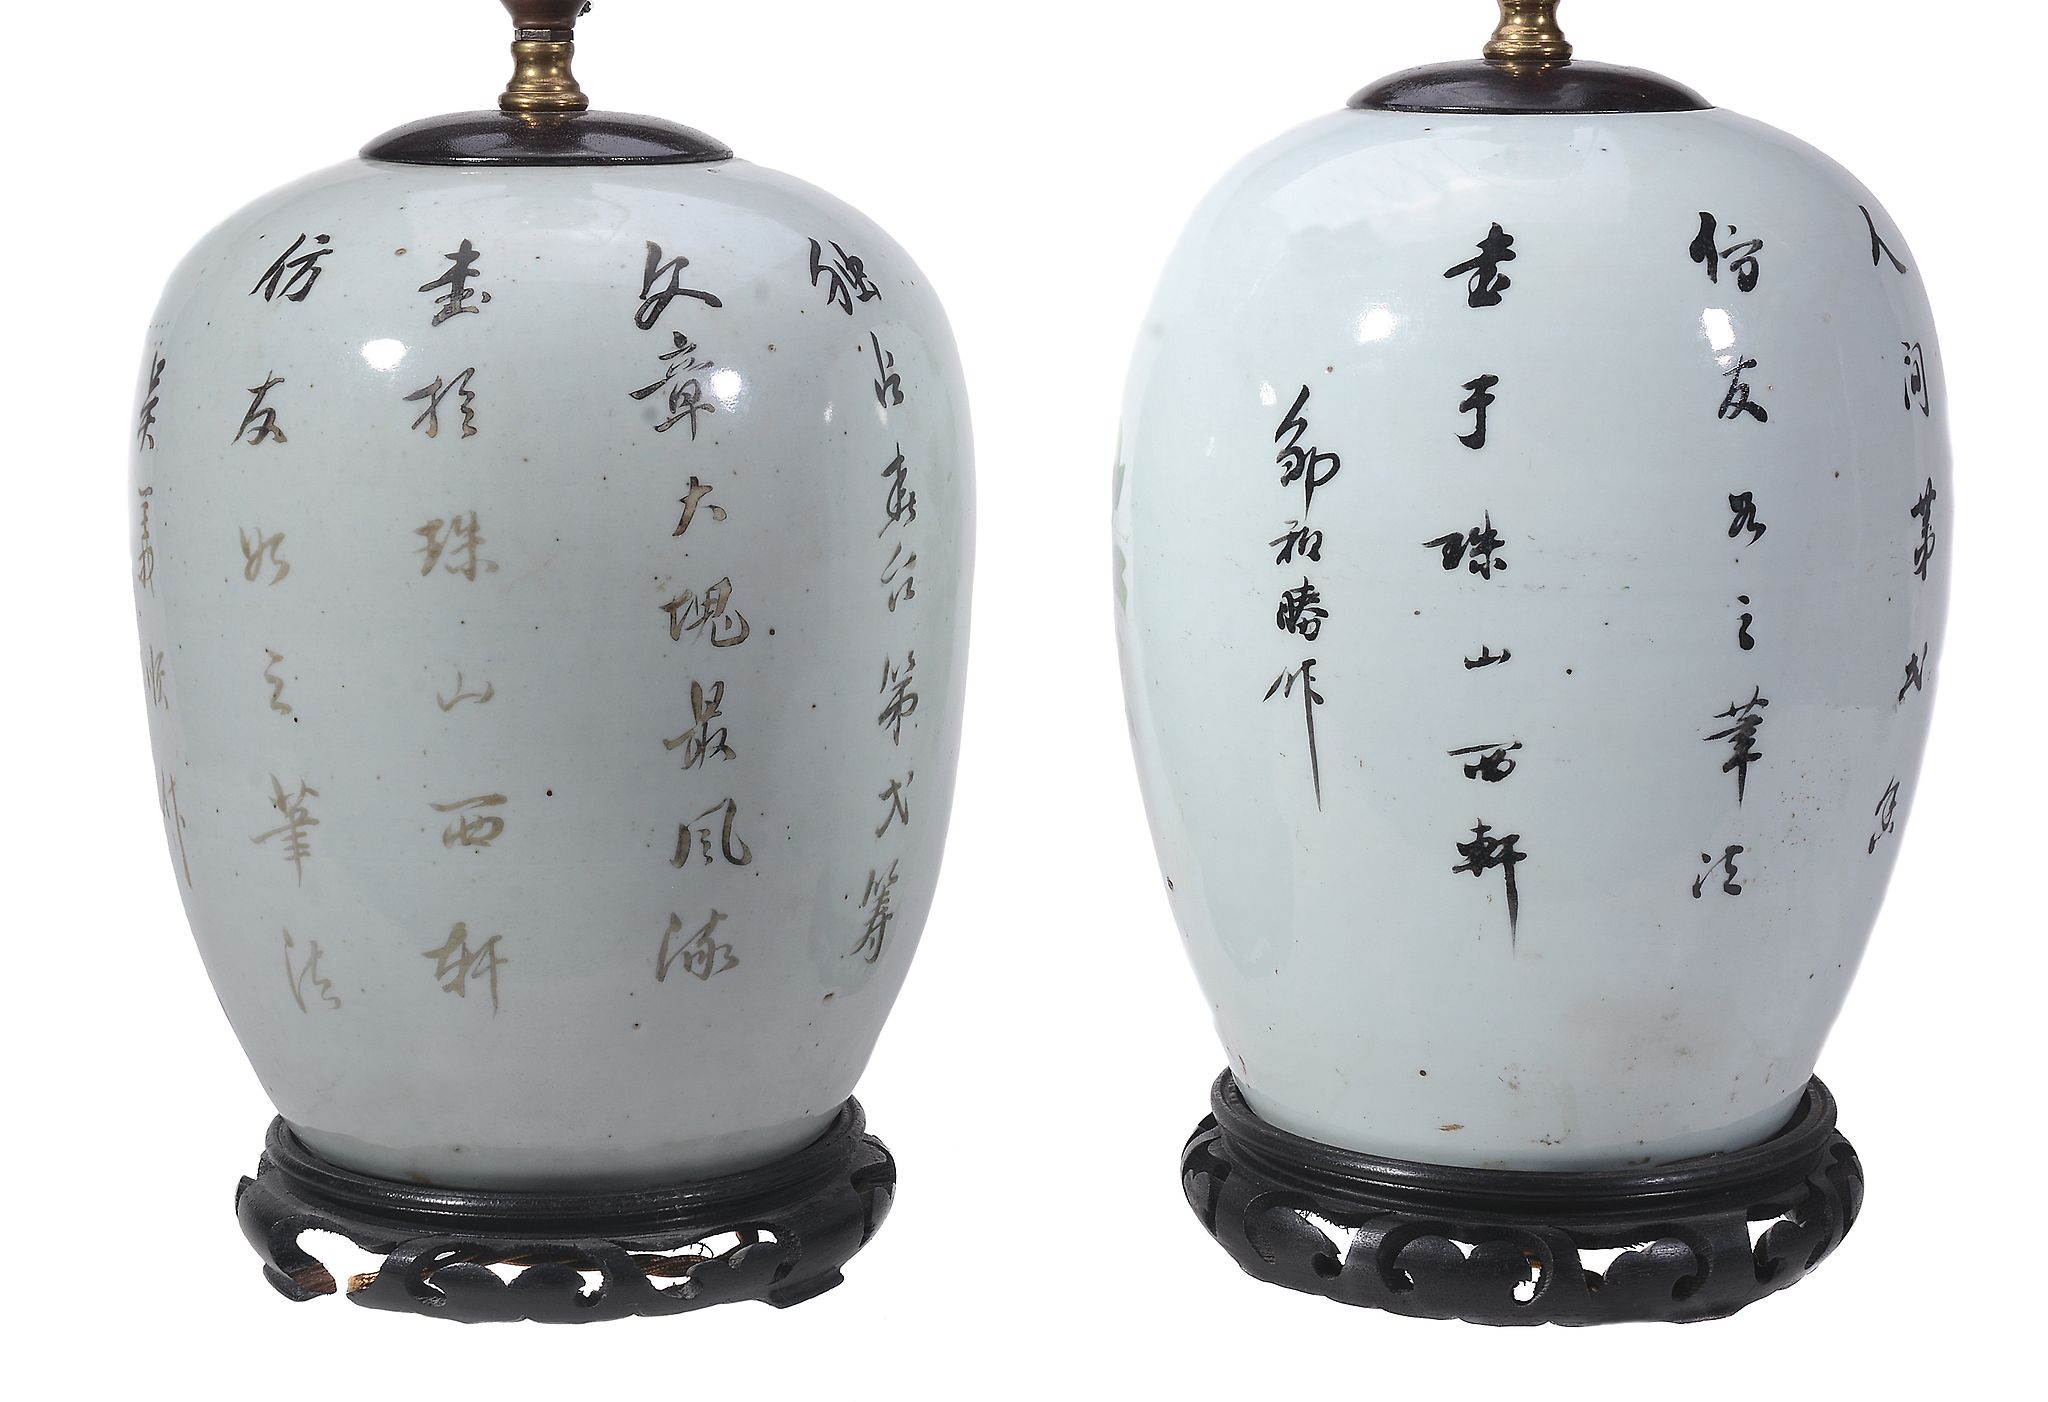 A pair of Chinese poreclain vases, 20th century   A pair of Chinese poreclain vases,   20th century, - Image 2 of 2